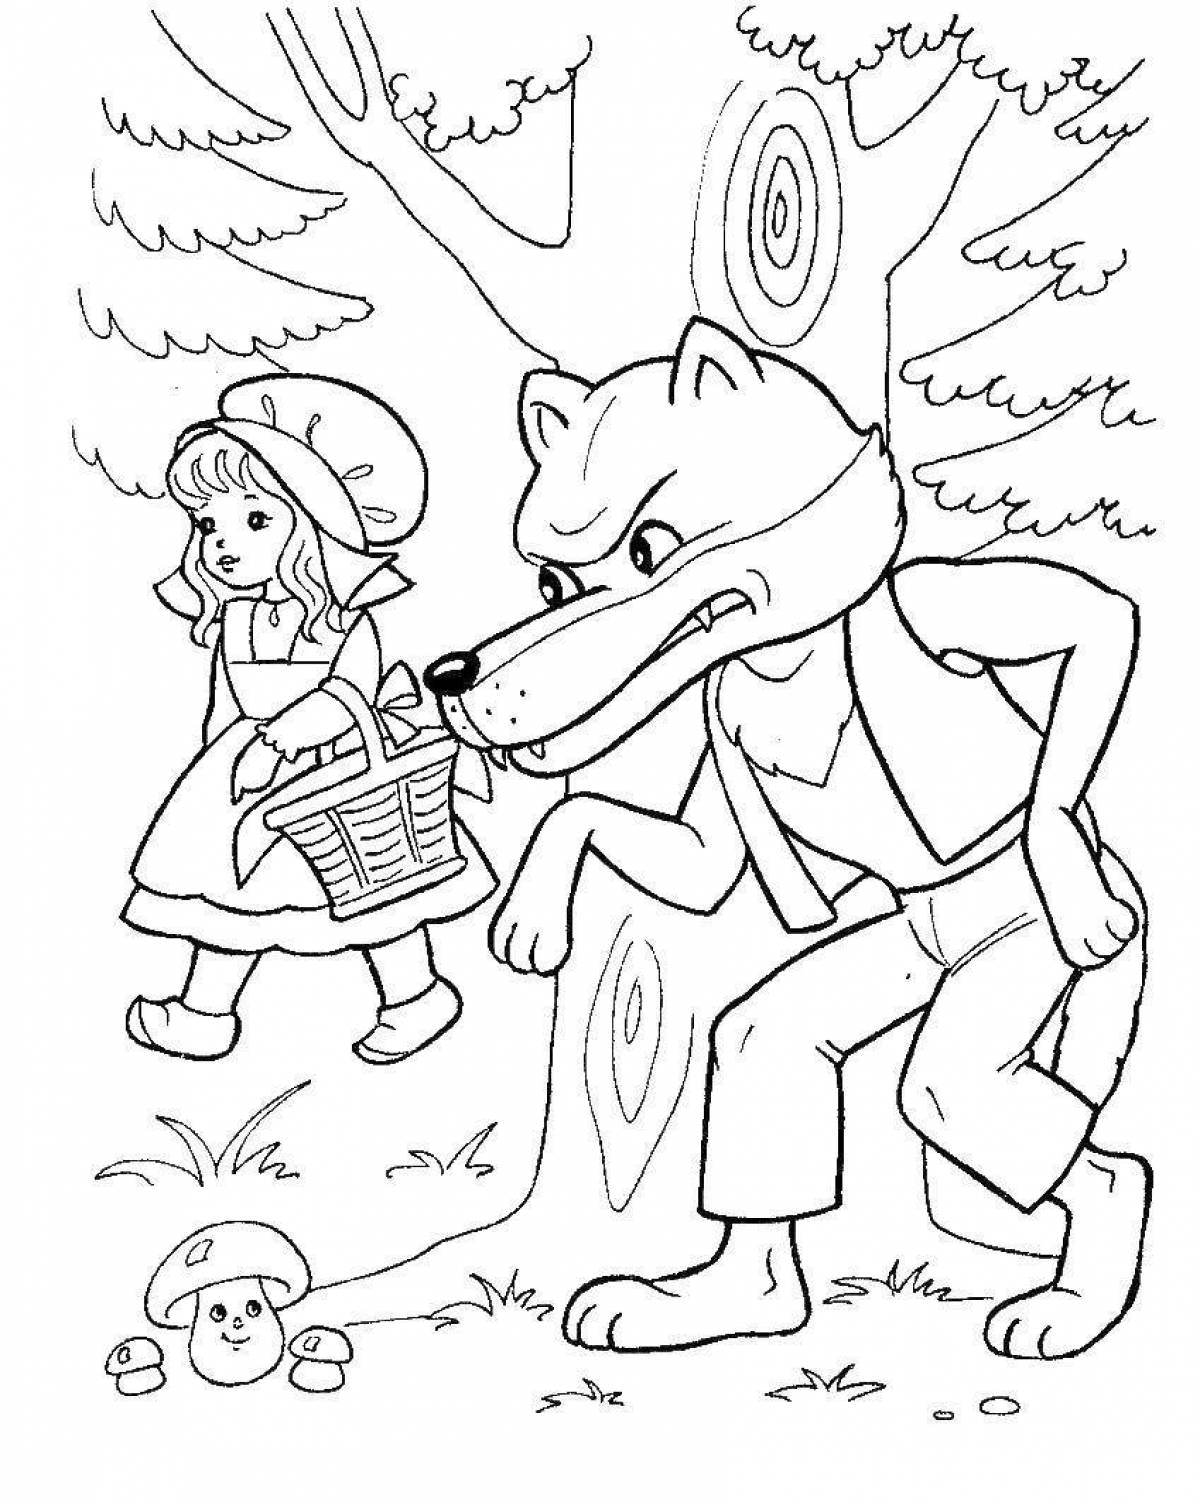 Coloring Little Red Riding Hood filled with paints